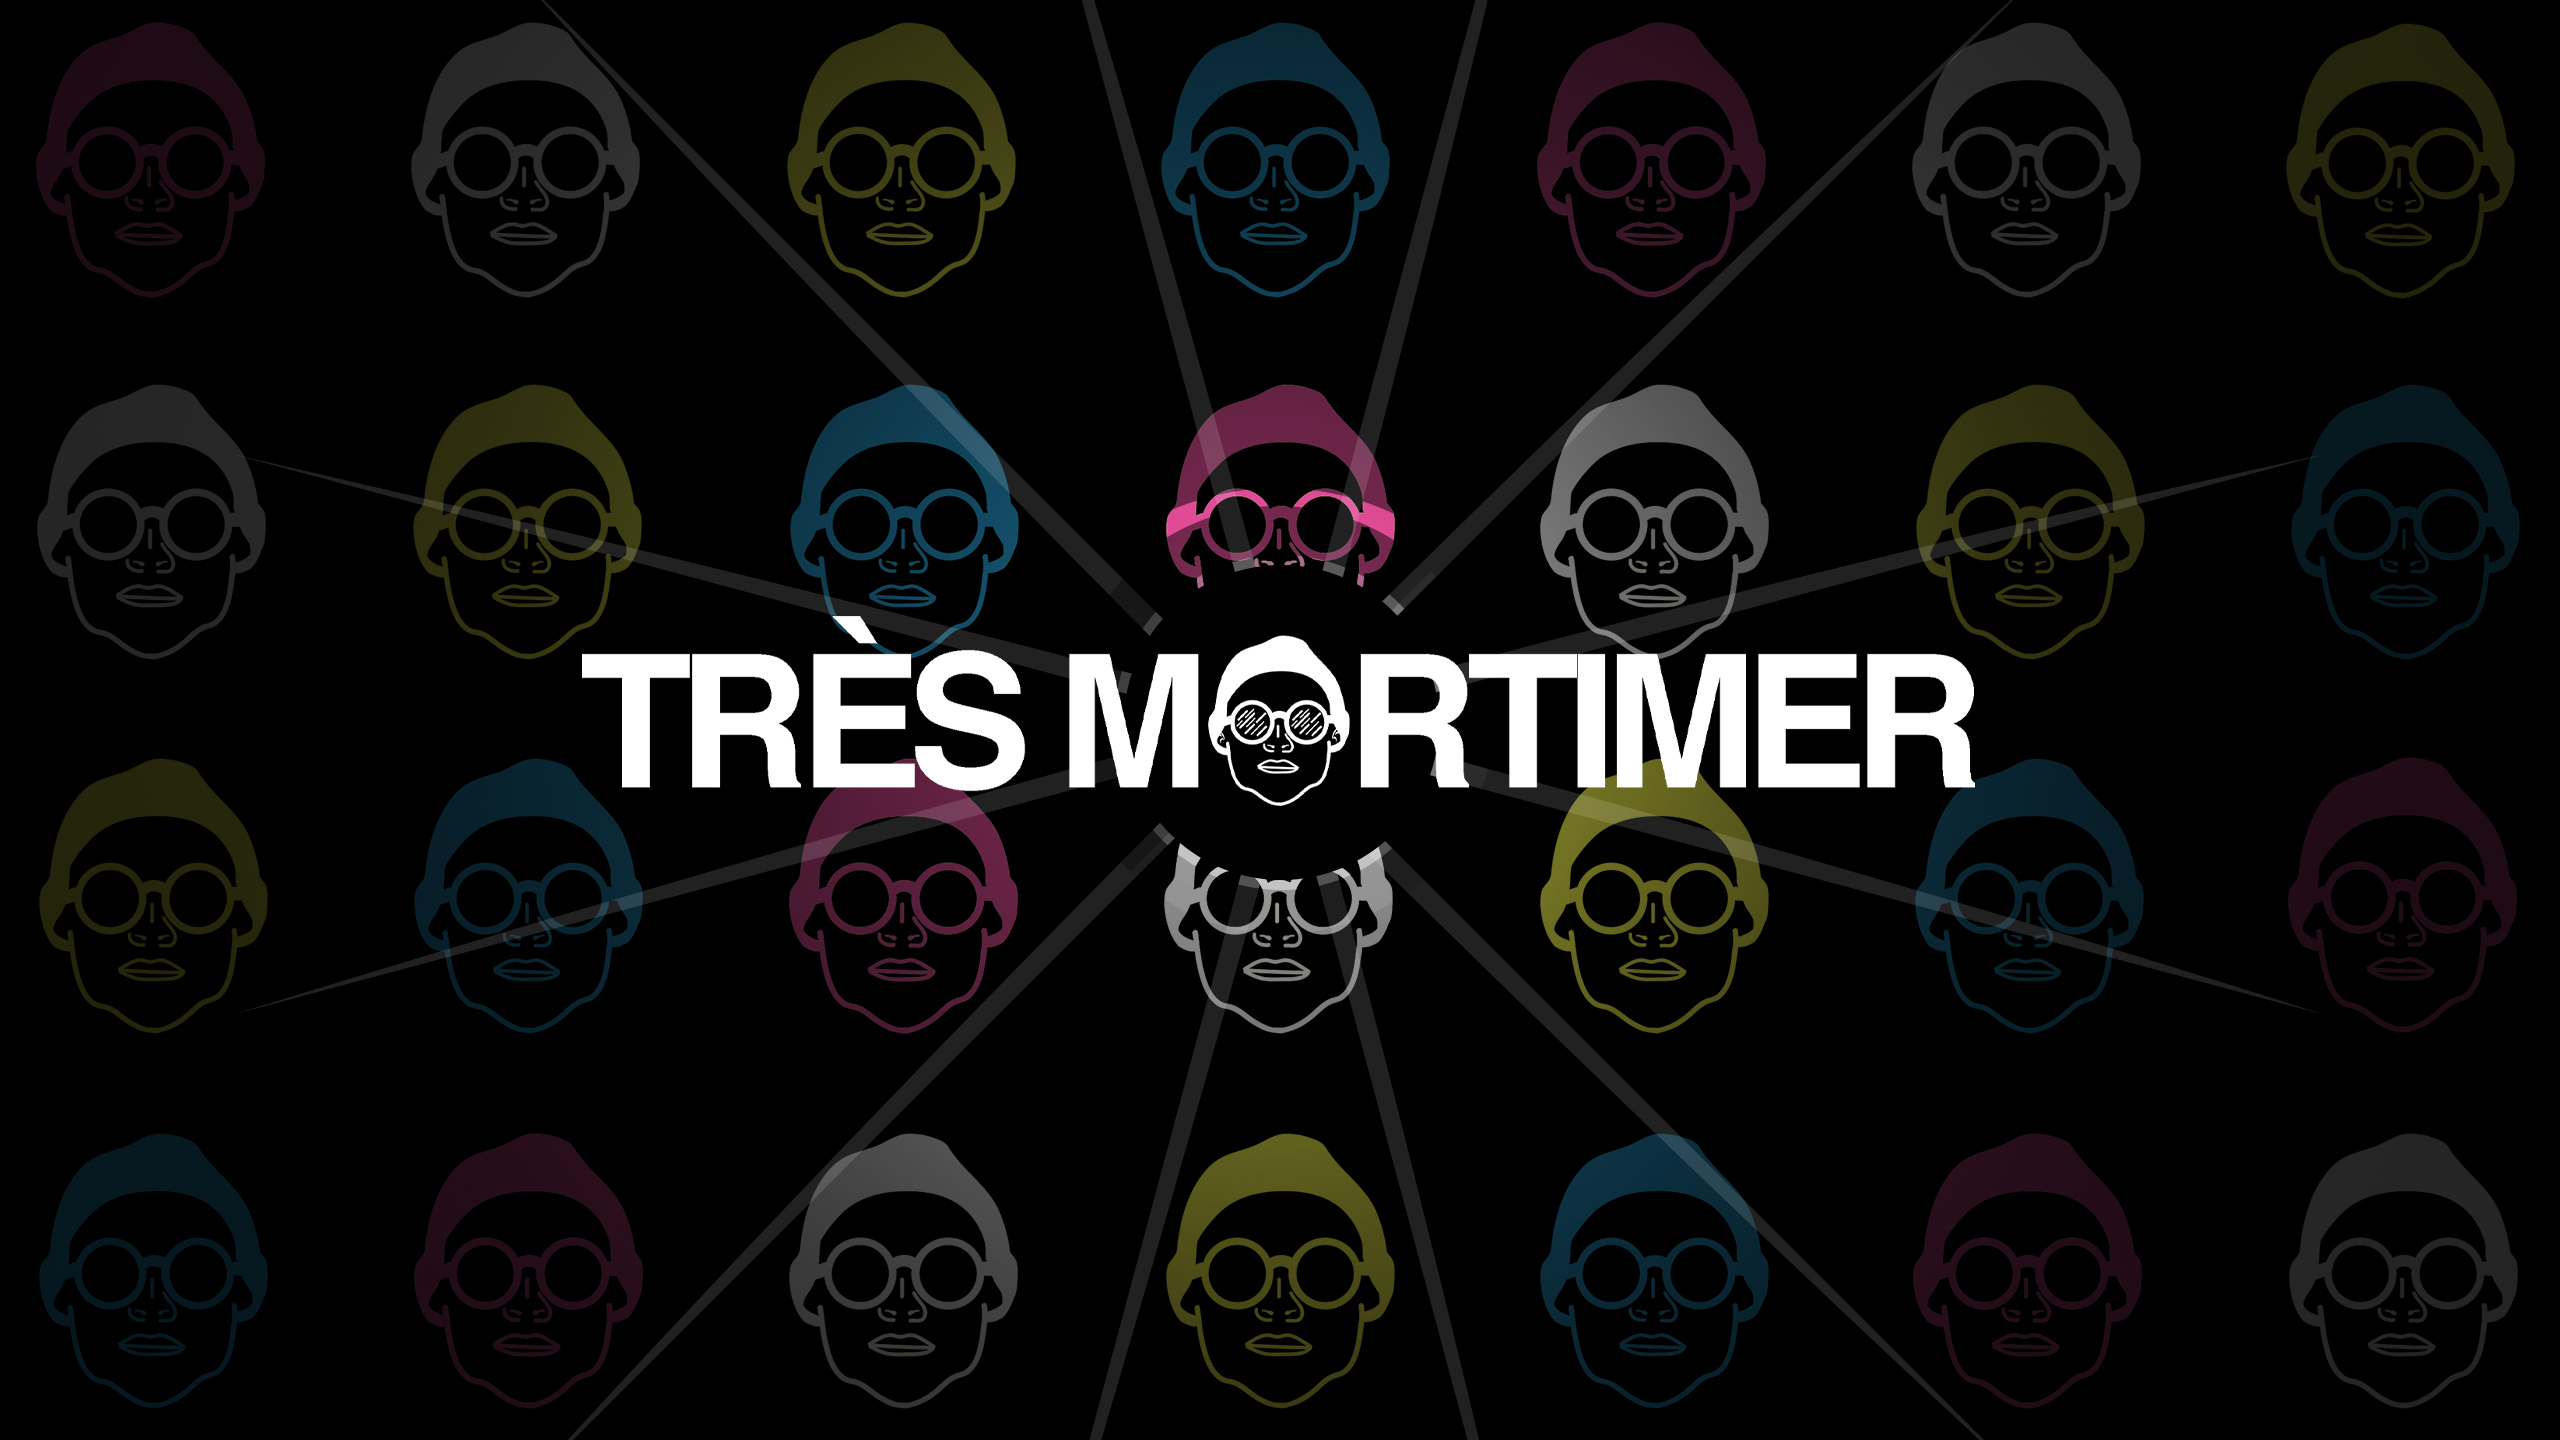 youtube channel banners tres mortimer 1 – très mortimer official website